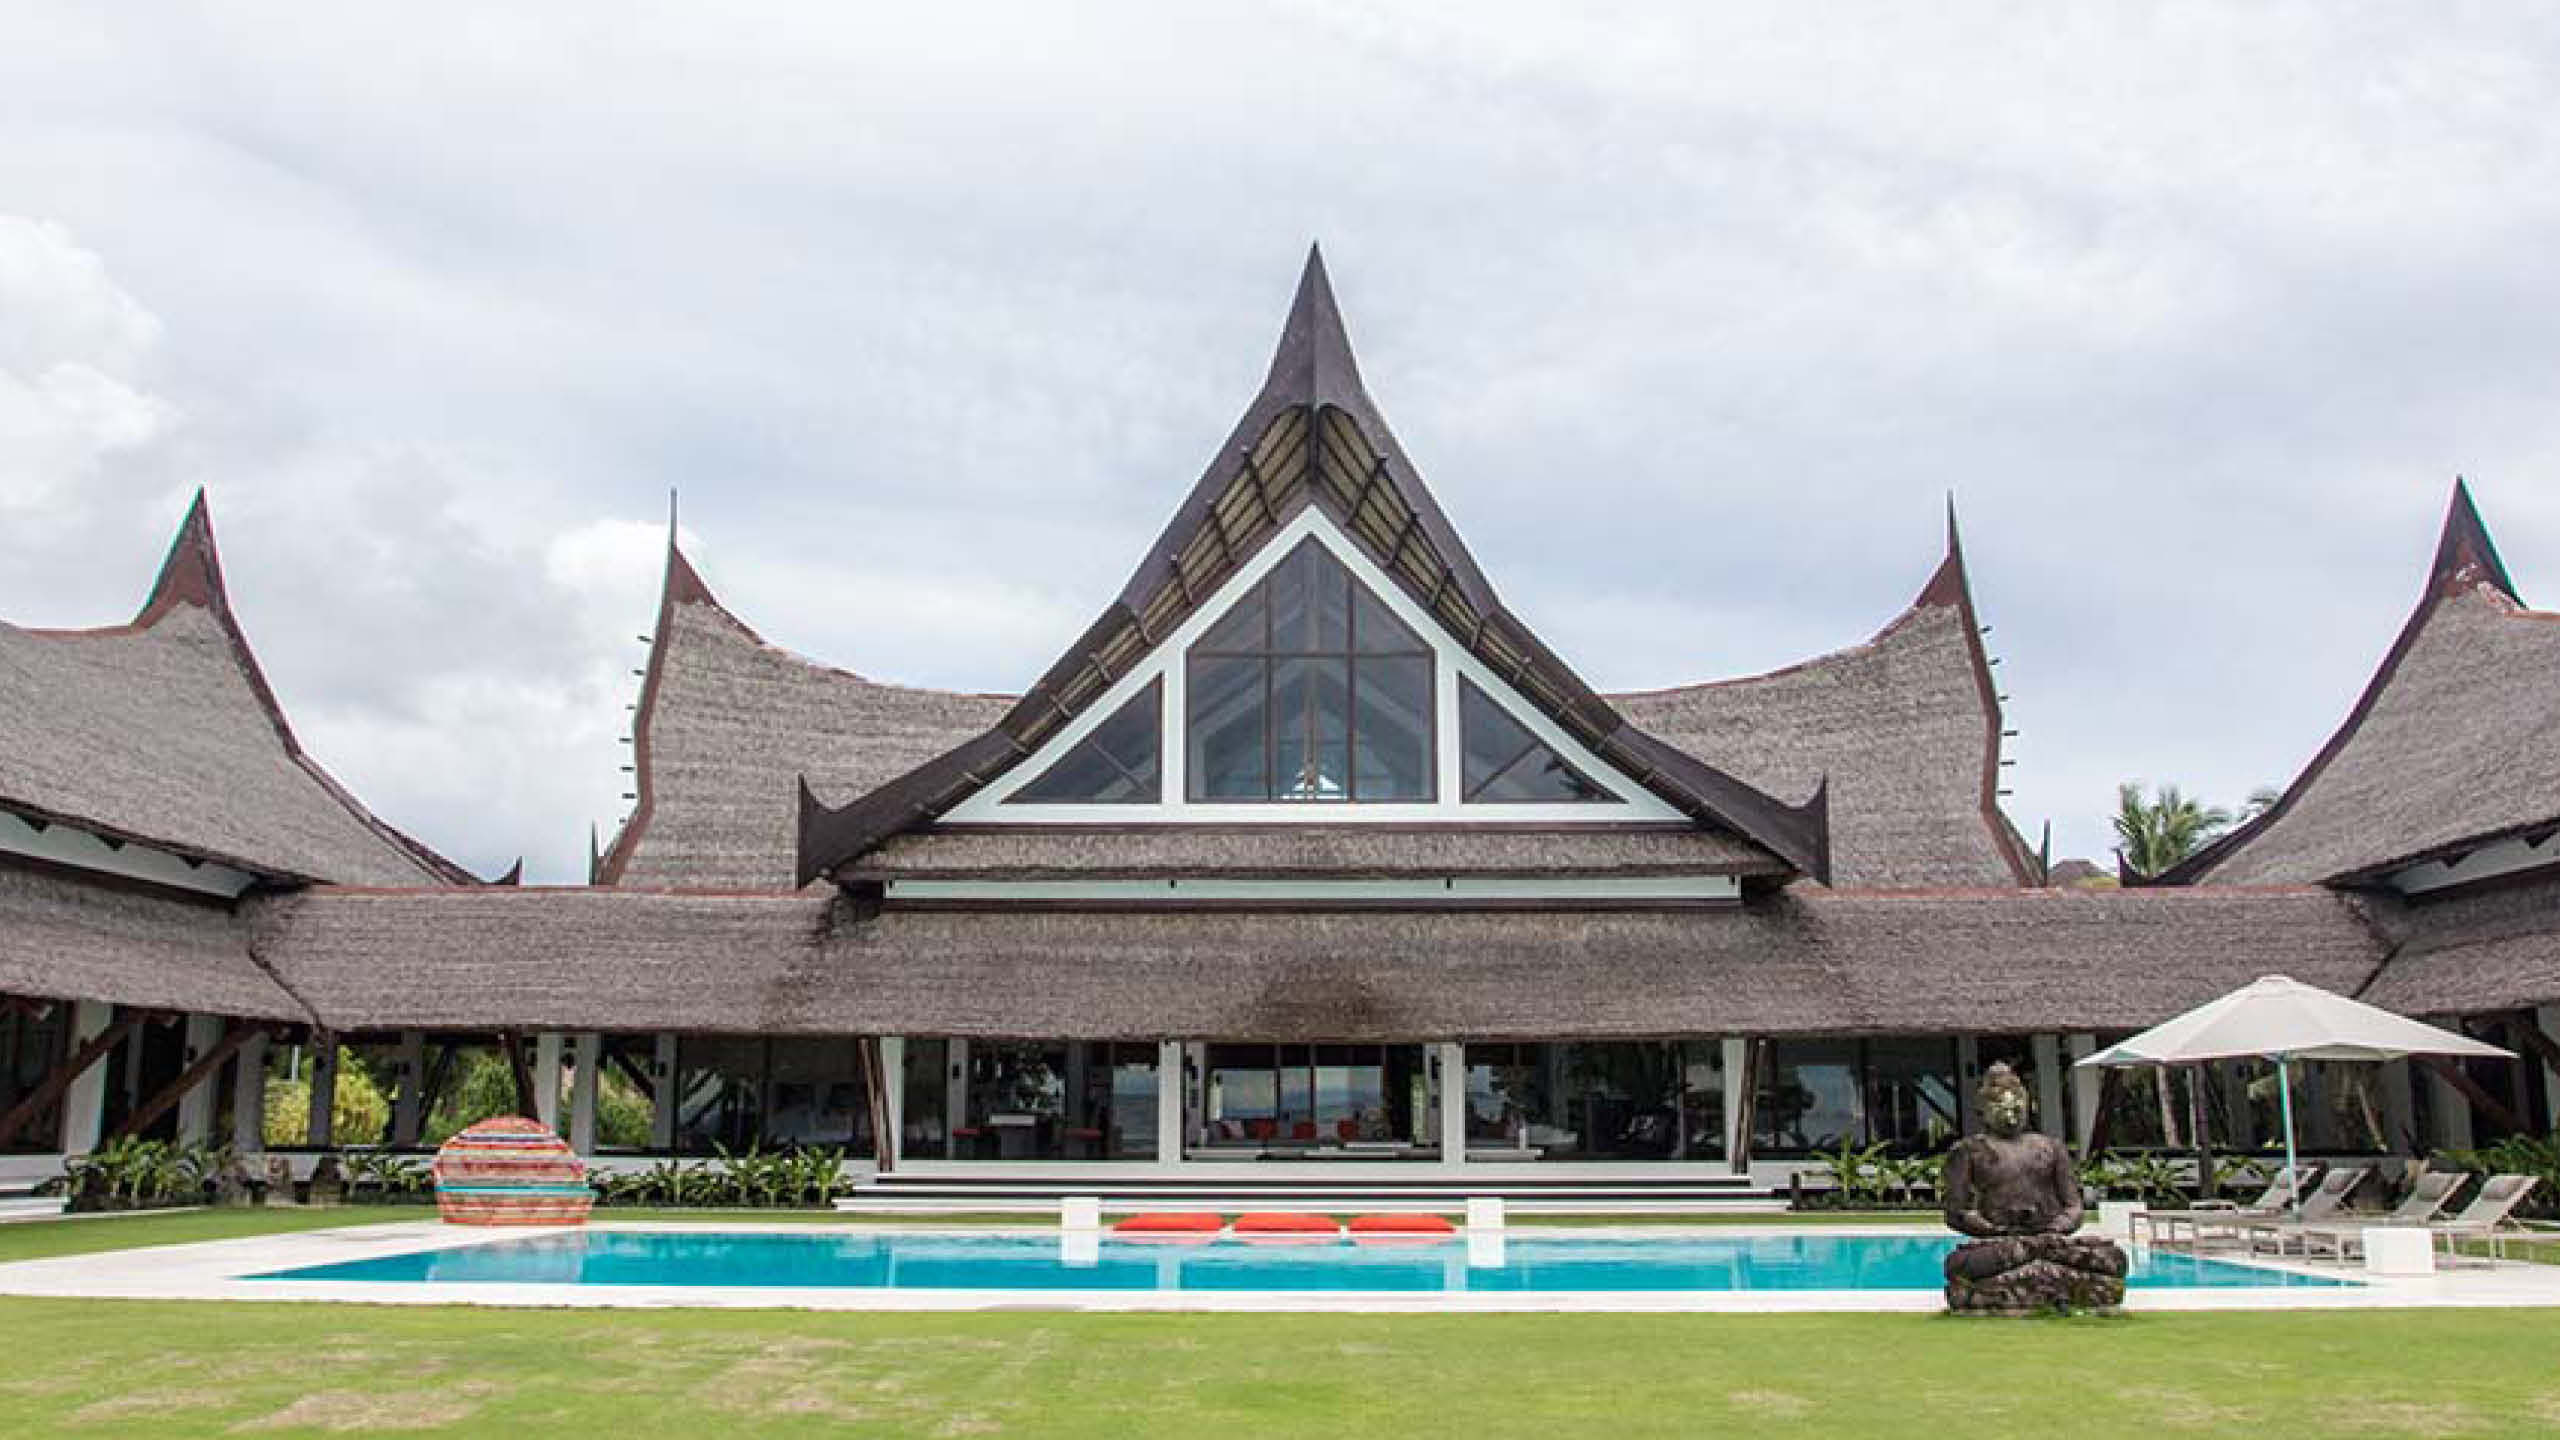 A large resort featuring nipa hut design with tall thatched roofs and a pool.